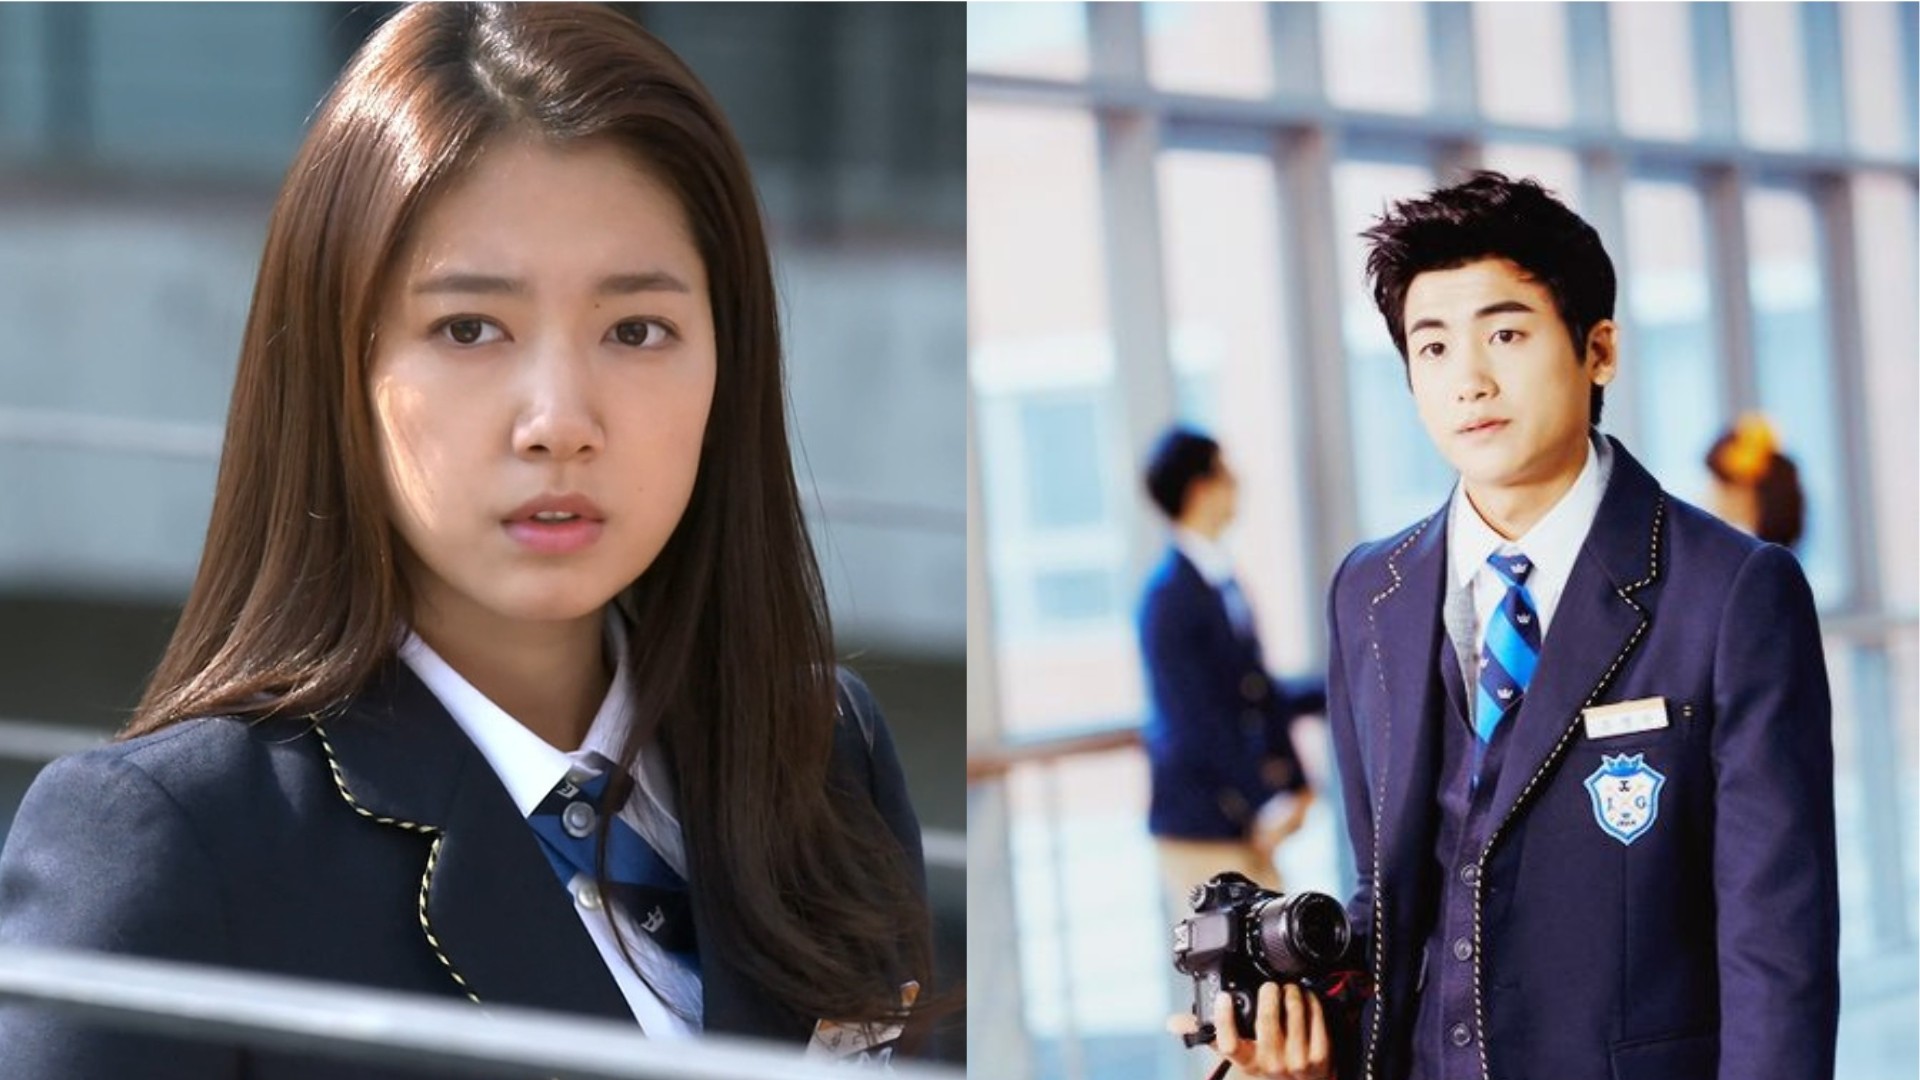 Park Hyung-sik and Park Shin-hye from 'The Heirs' to reunite in K-drama  romcom series, 'Doctor Slump' - YP | South China Morning Post